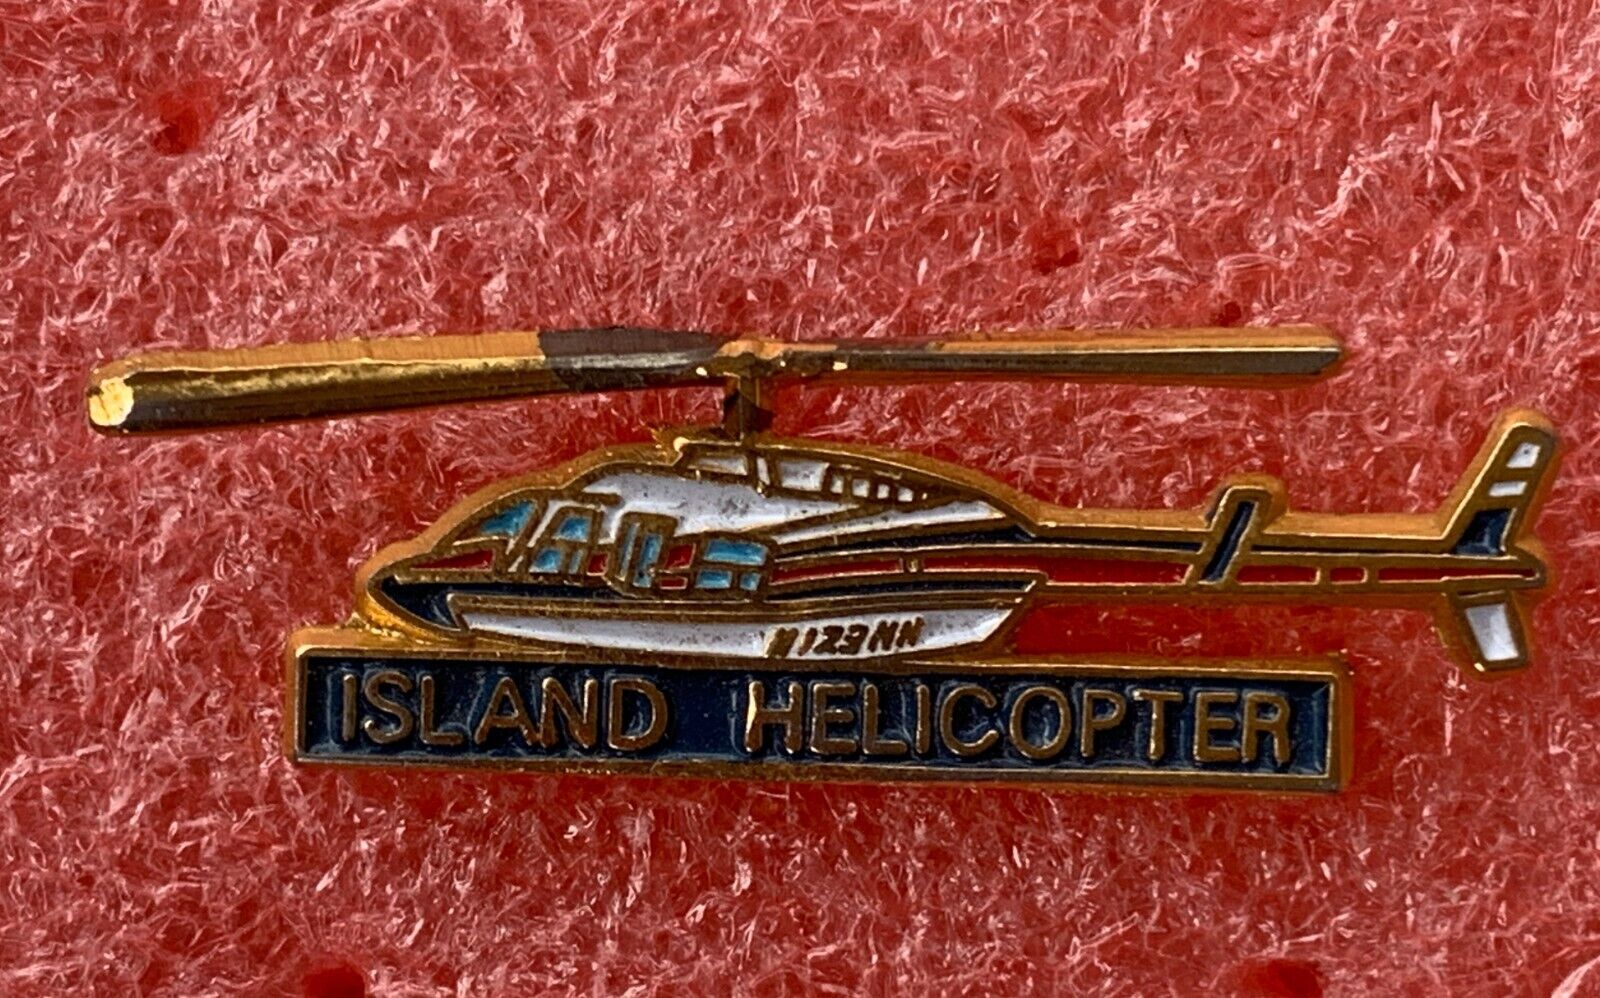 T13 pins HELICOPTER ISLAND HELICOPTER helicopter helicopter helicopter lapel